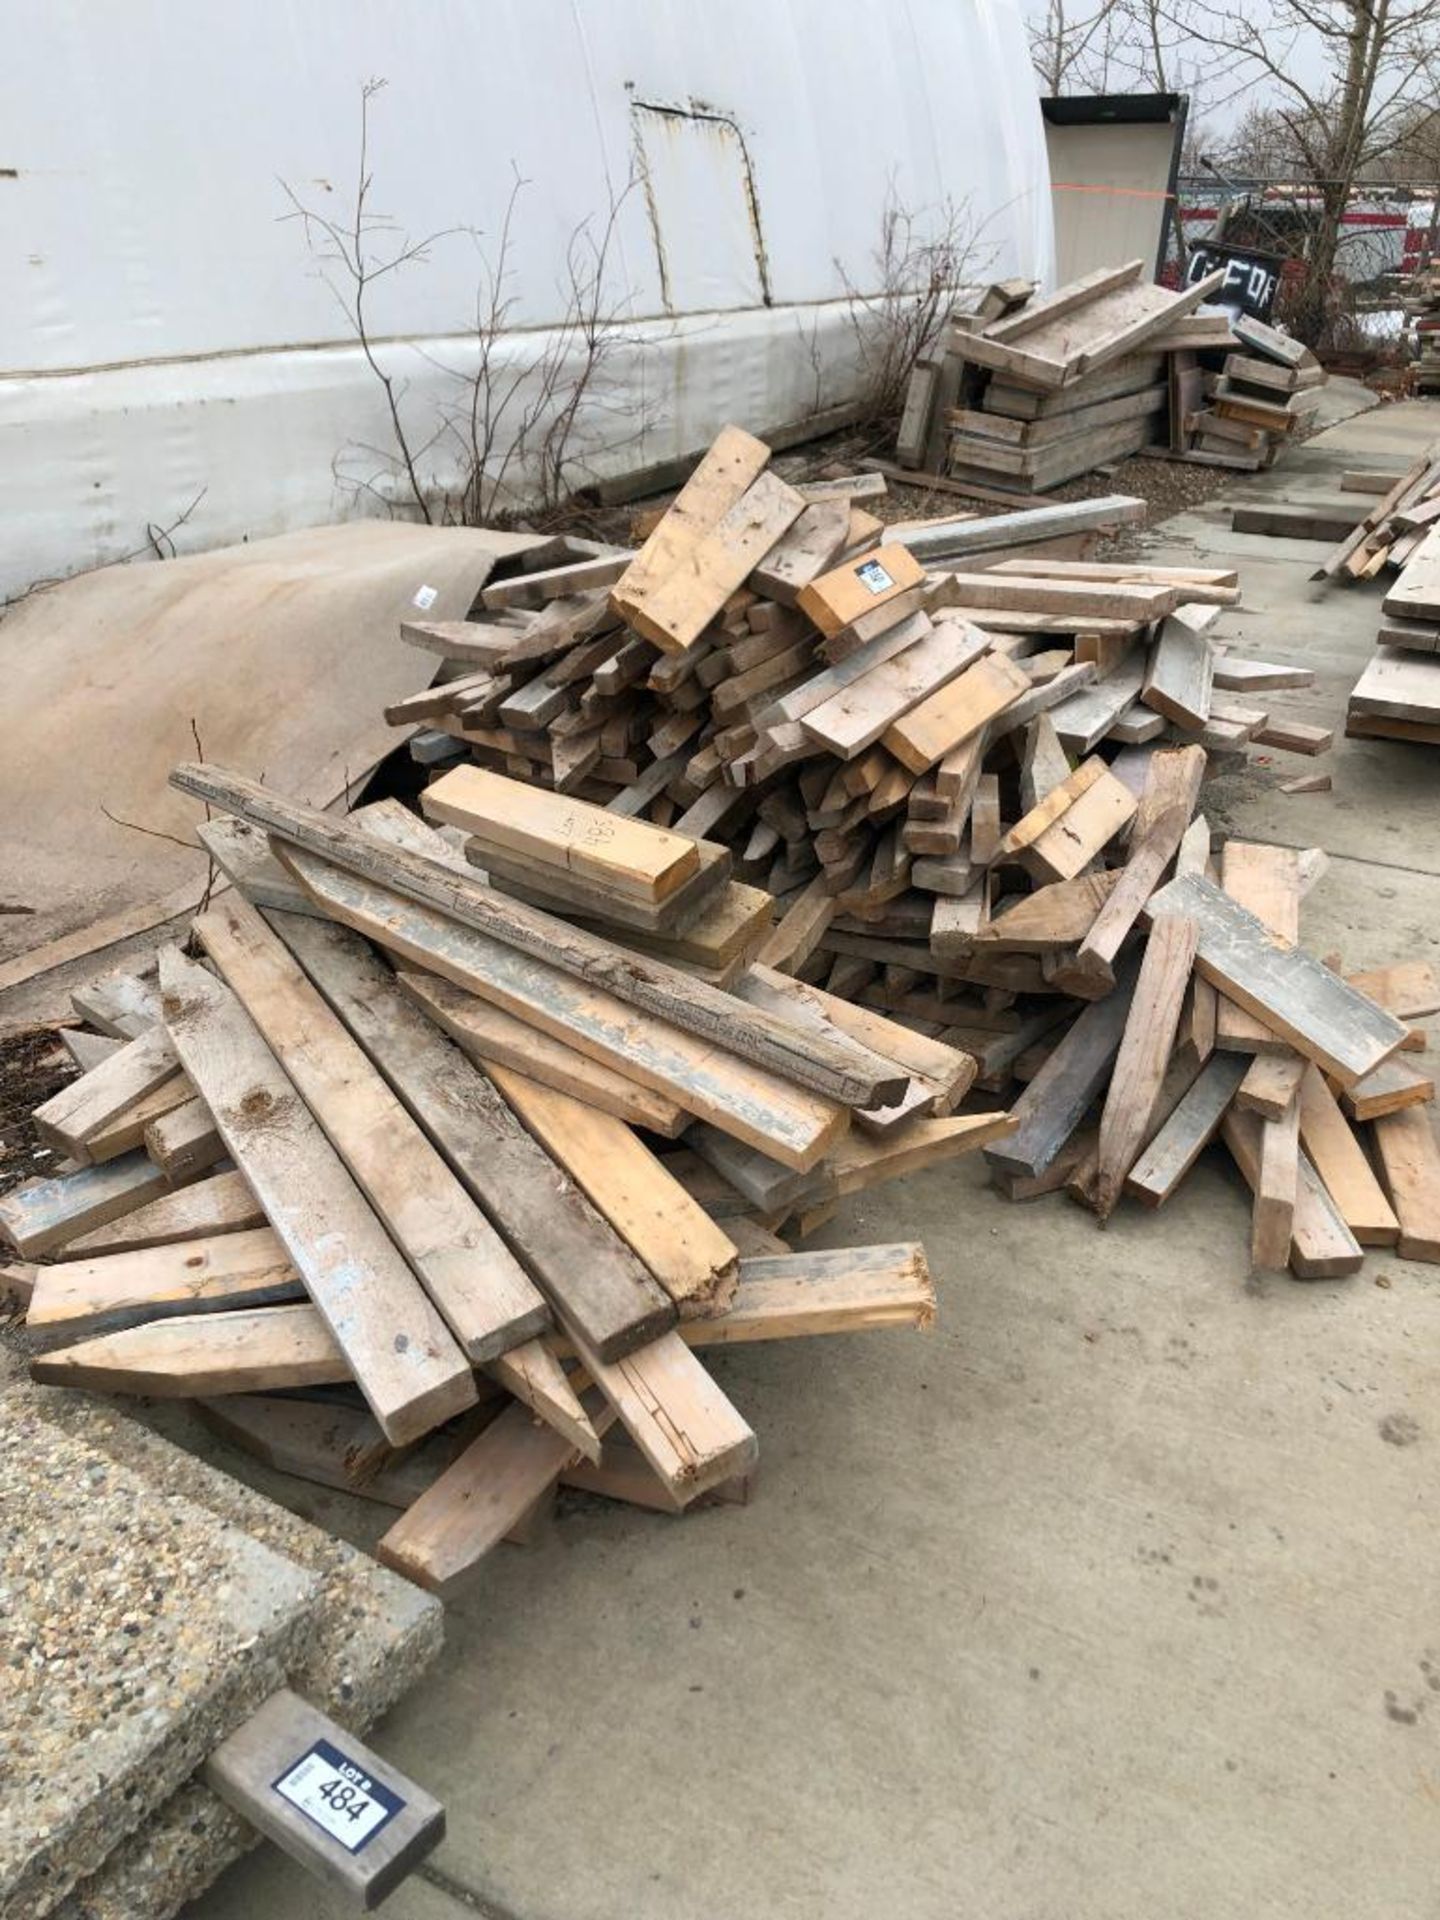 Lot of Asst. Wood Cut-Offs, Stakes, etc. - Image 2 of 3